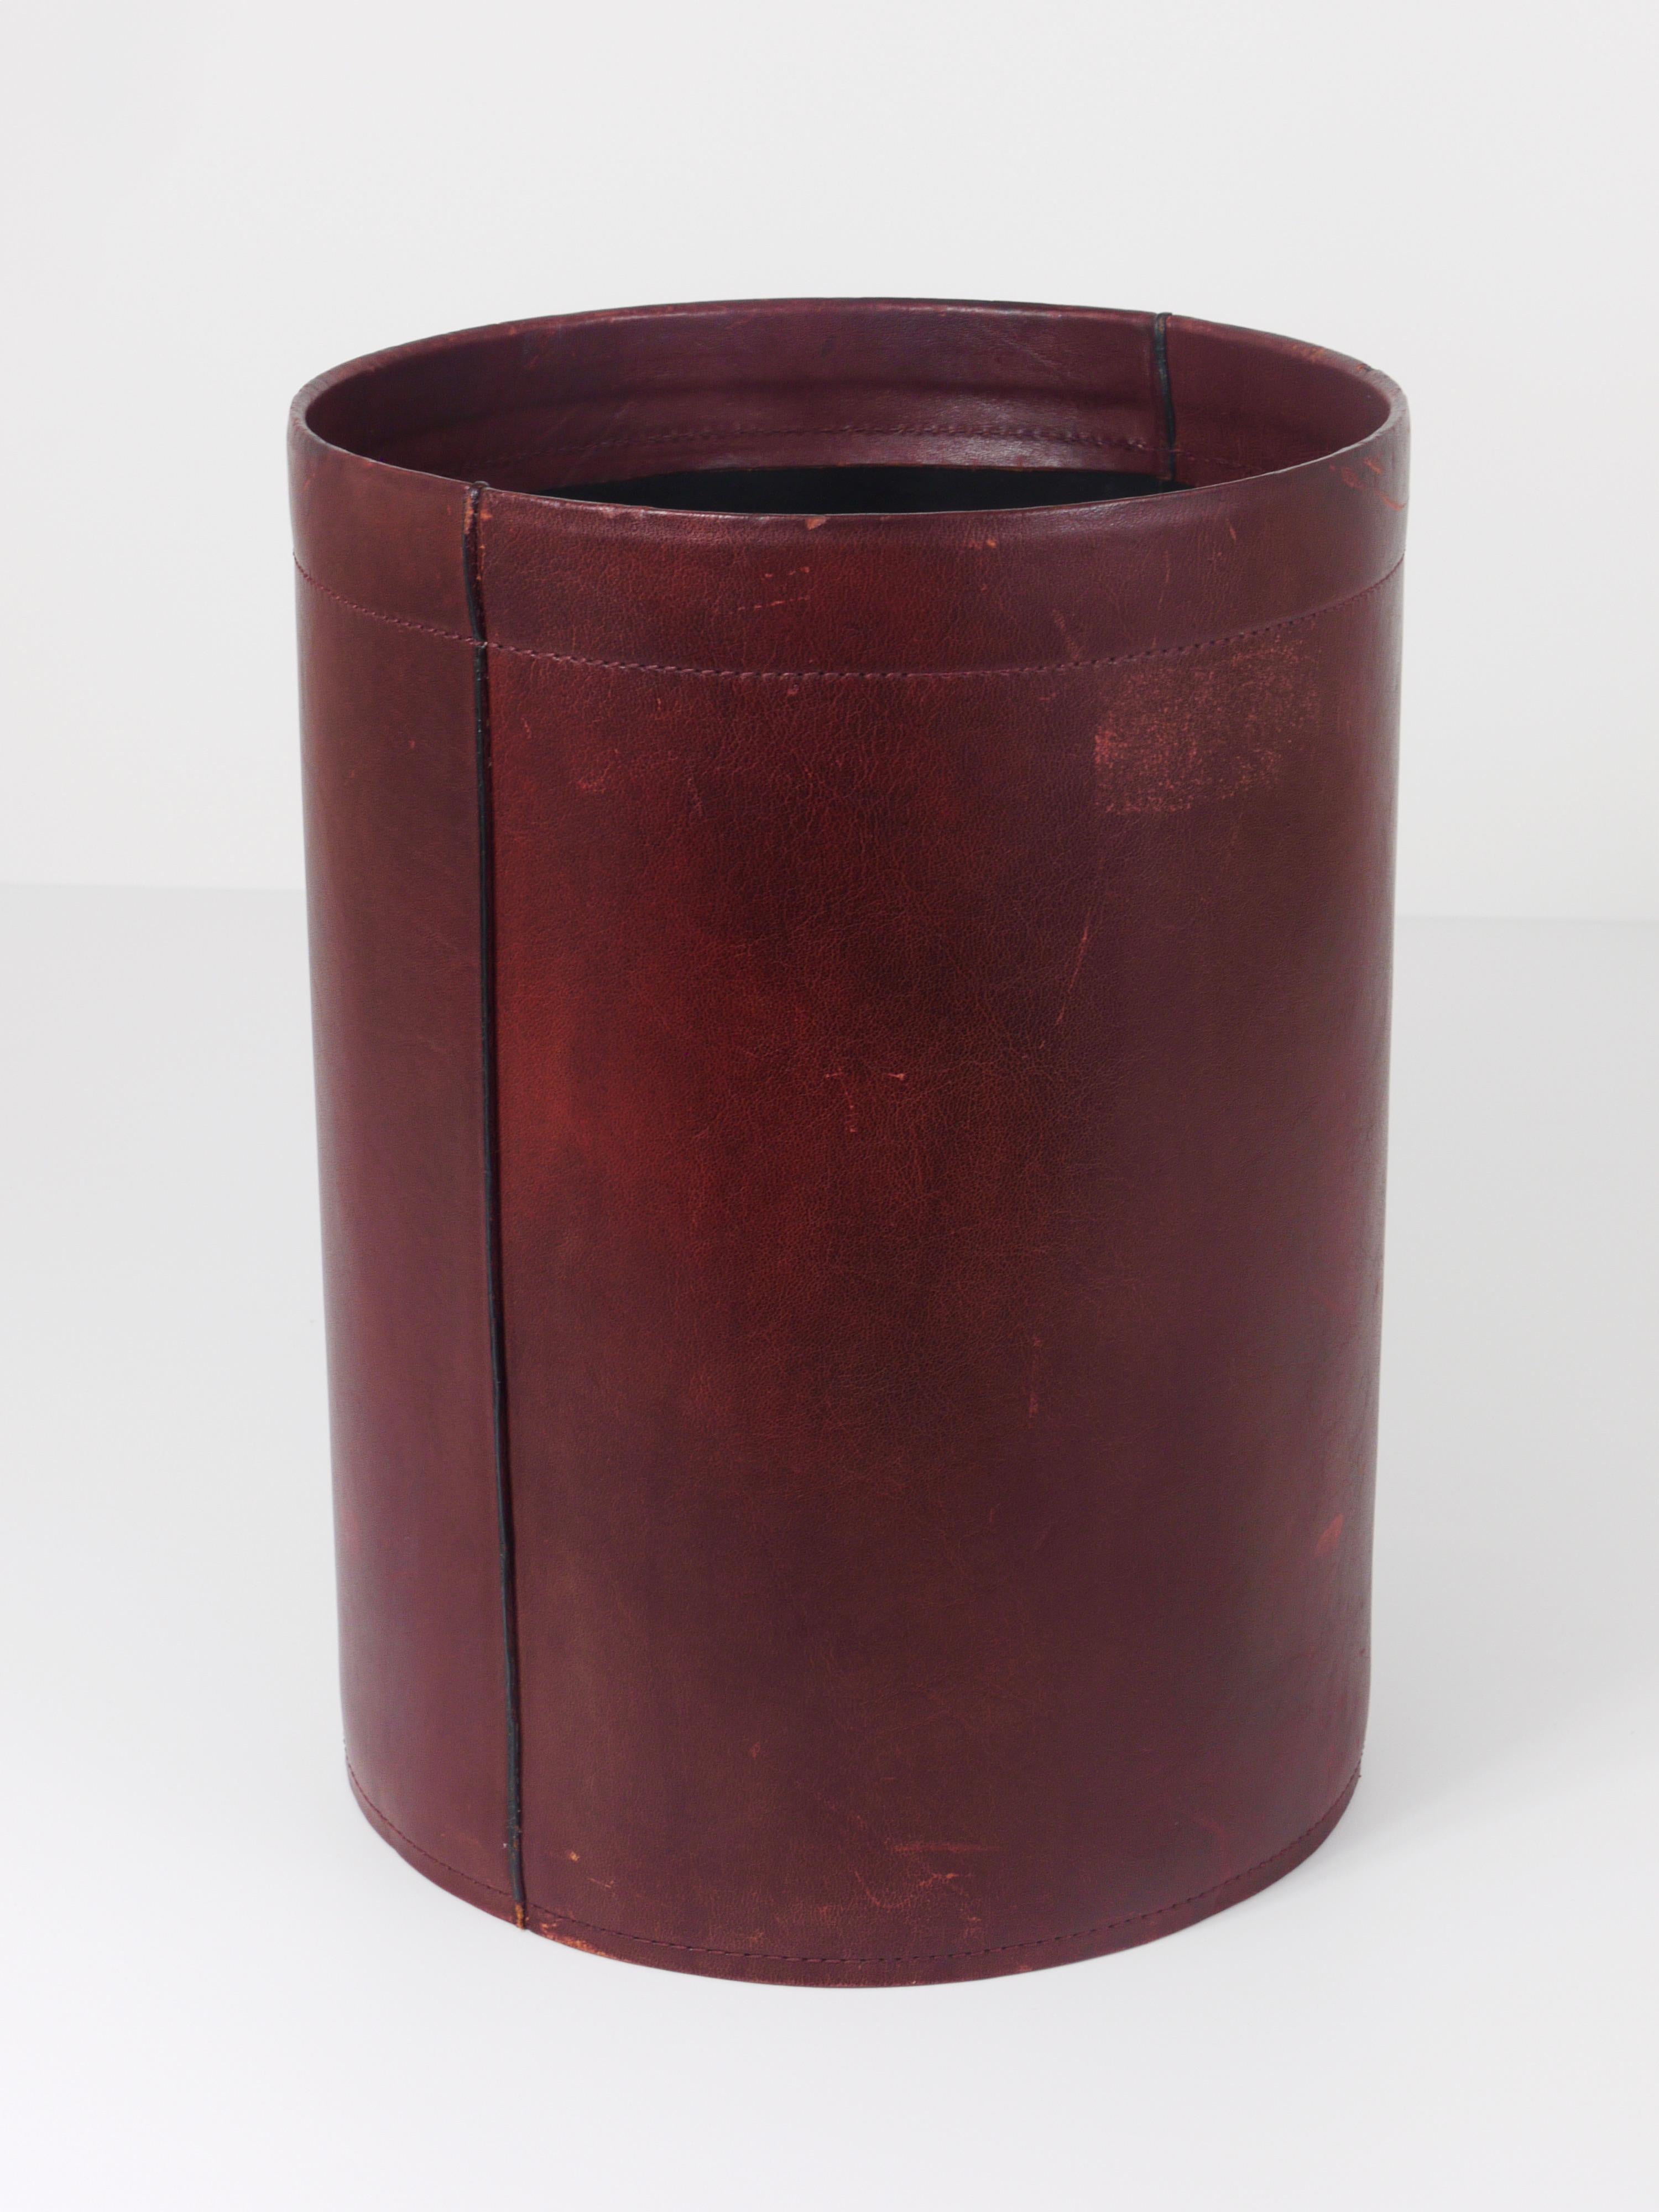 Hand-Crafted Jacques Adnet Style Red Brown Leather Wastepaper Basket Bin, France, 1970s